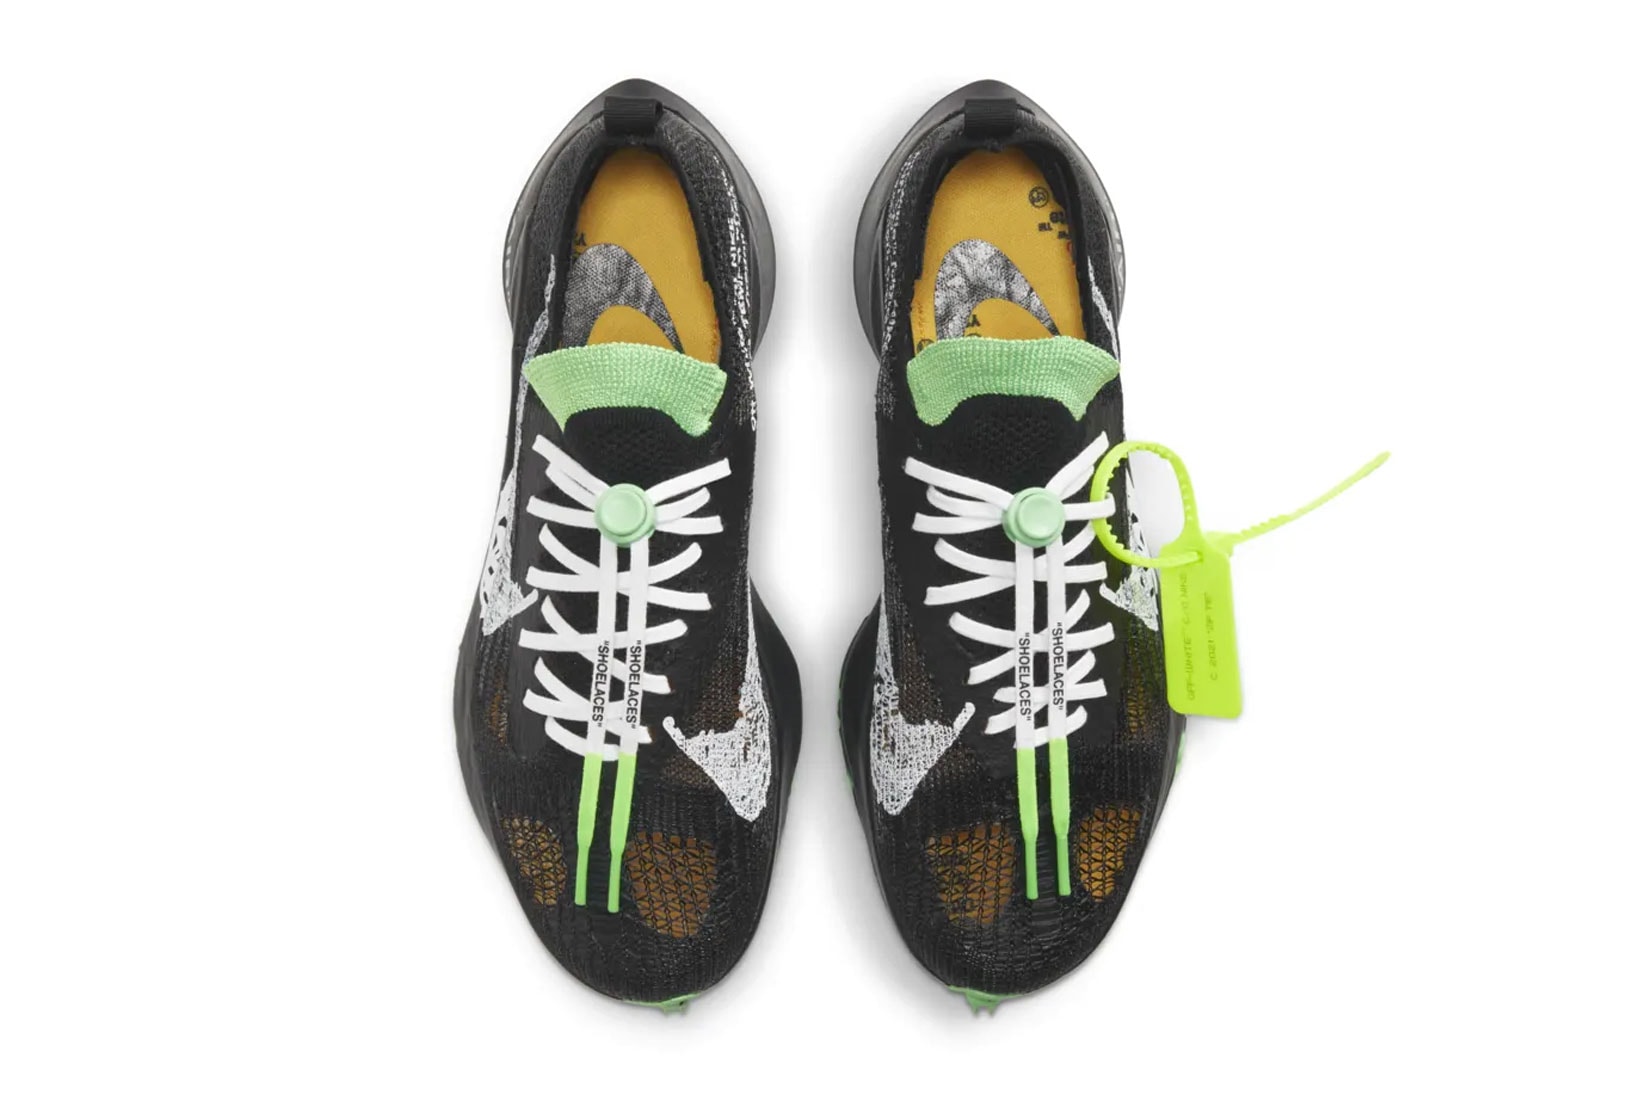 Off-White™ x Nike Air Zoom Tempo NEXT% Black Green Upper Shoelaces Details